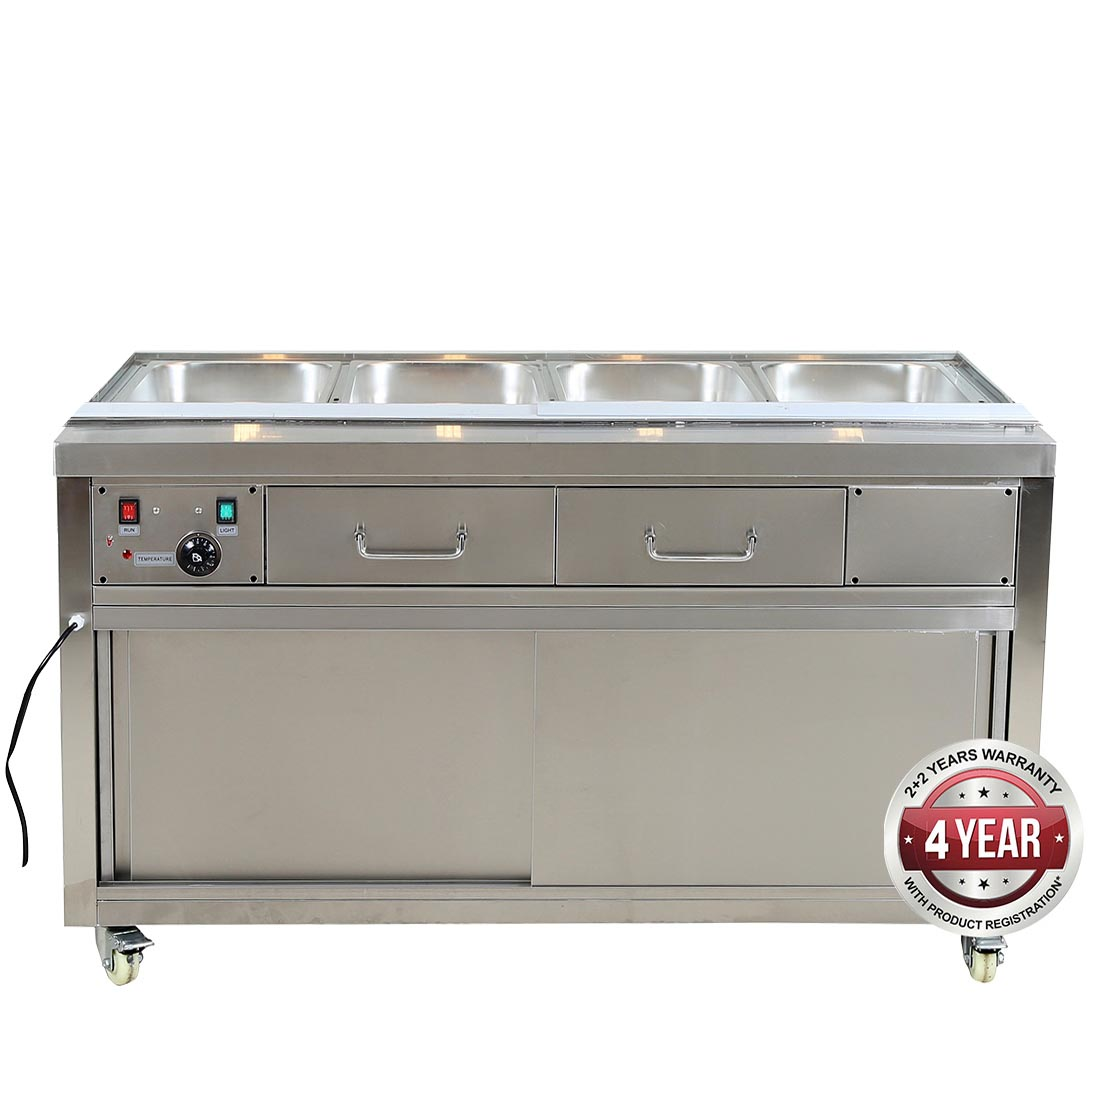 Heated Bain Marie Food Display without Glass Top - PG150FE-B